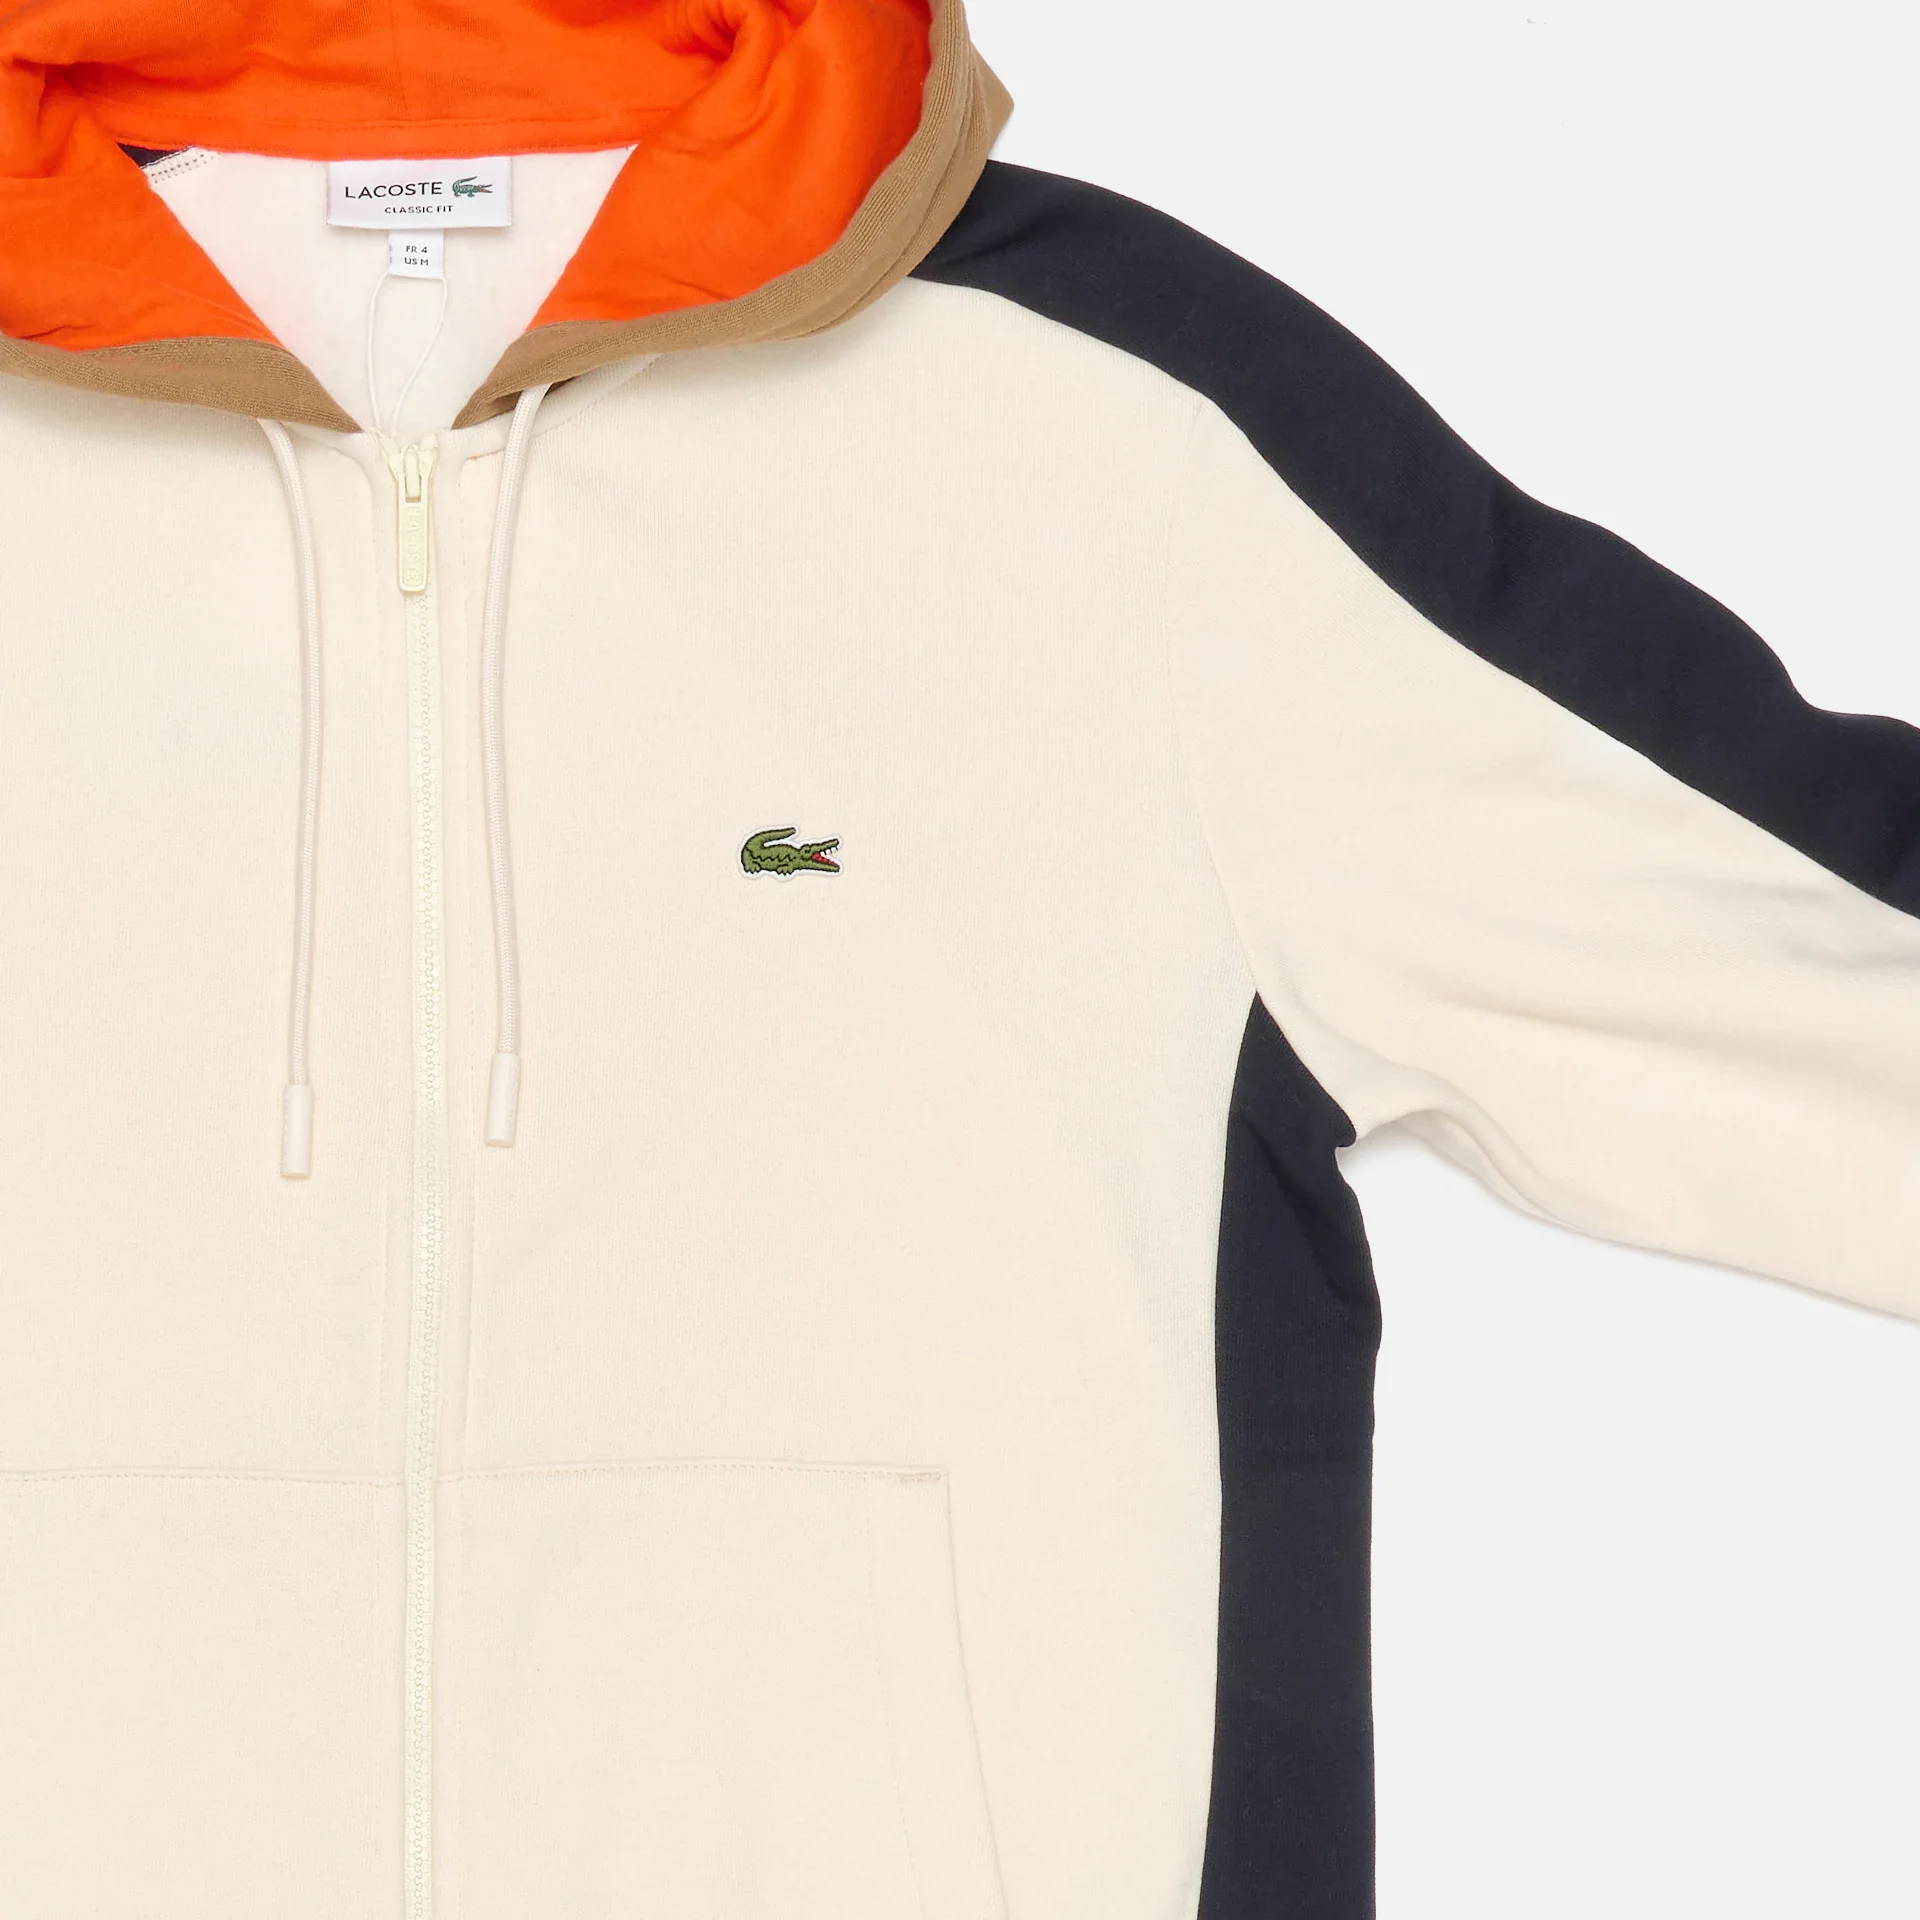 Lacoste Colorblock Hooded Sweatjacket Lapland/Cookie/Abysm